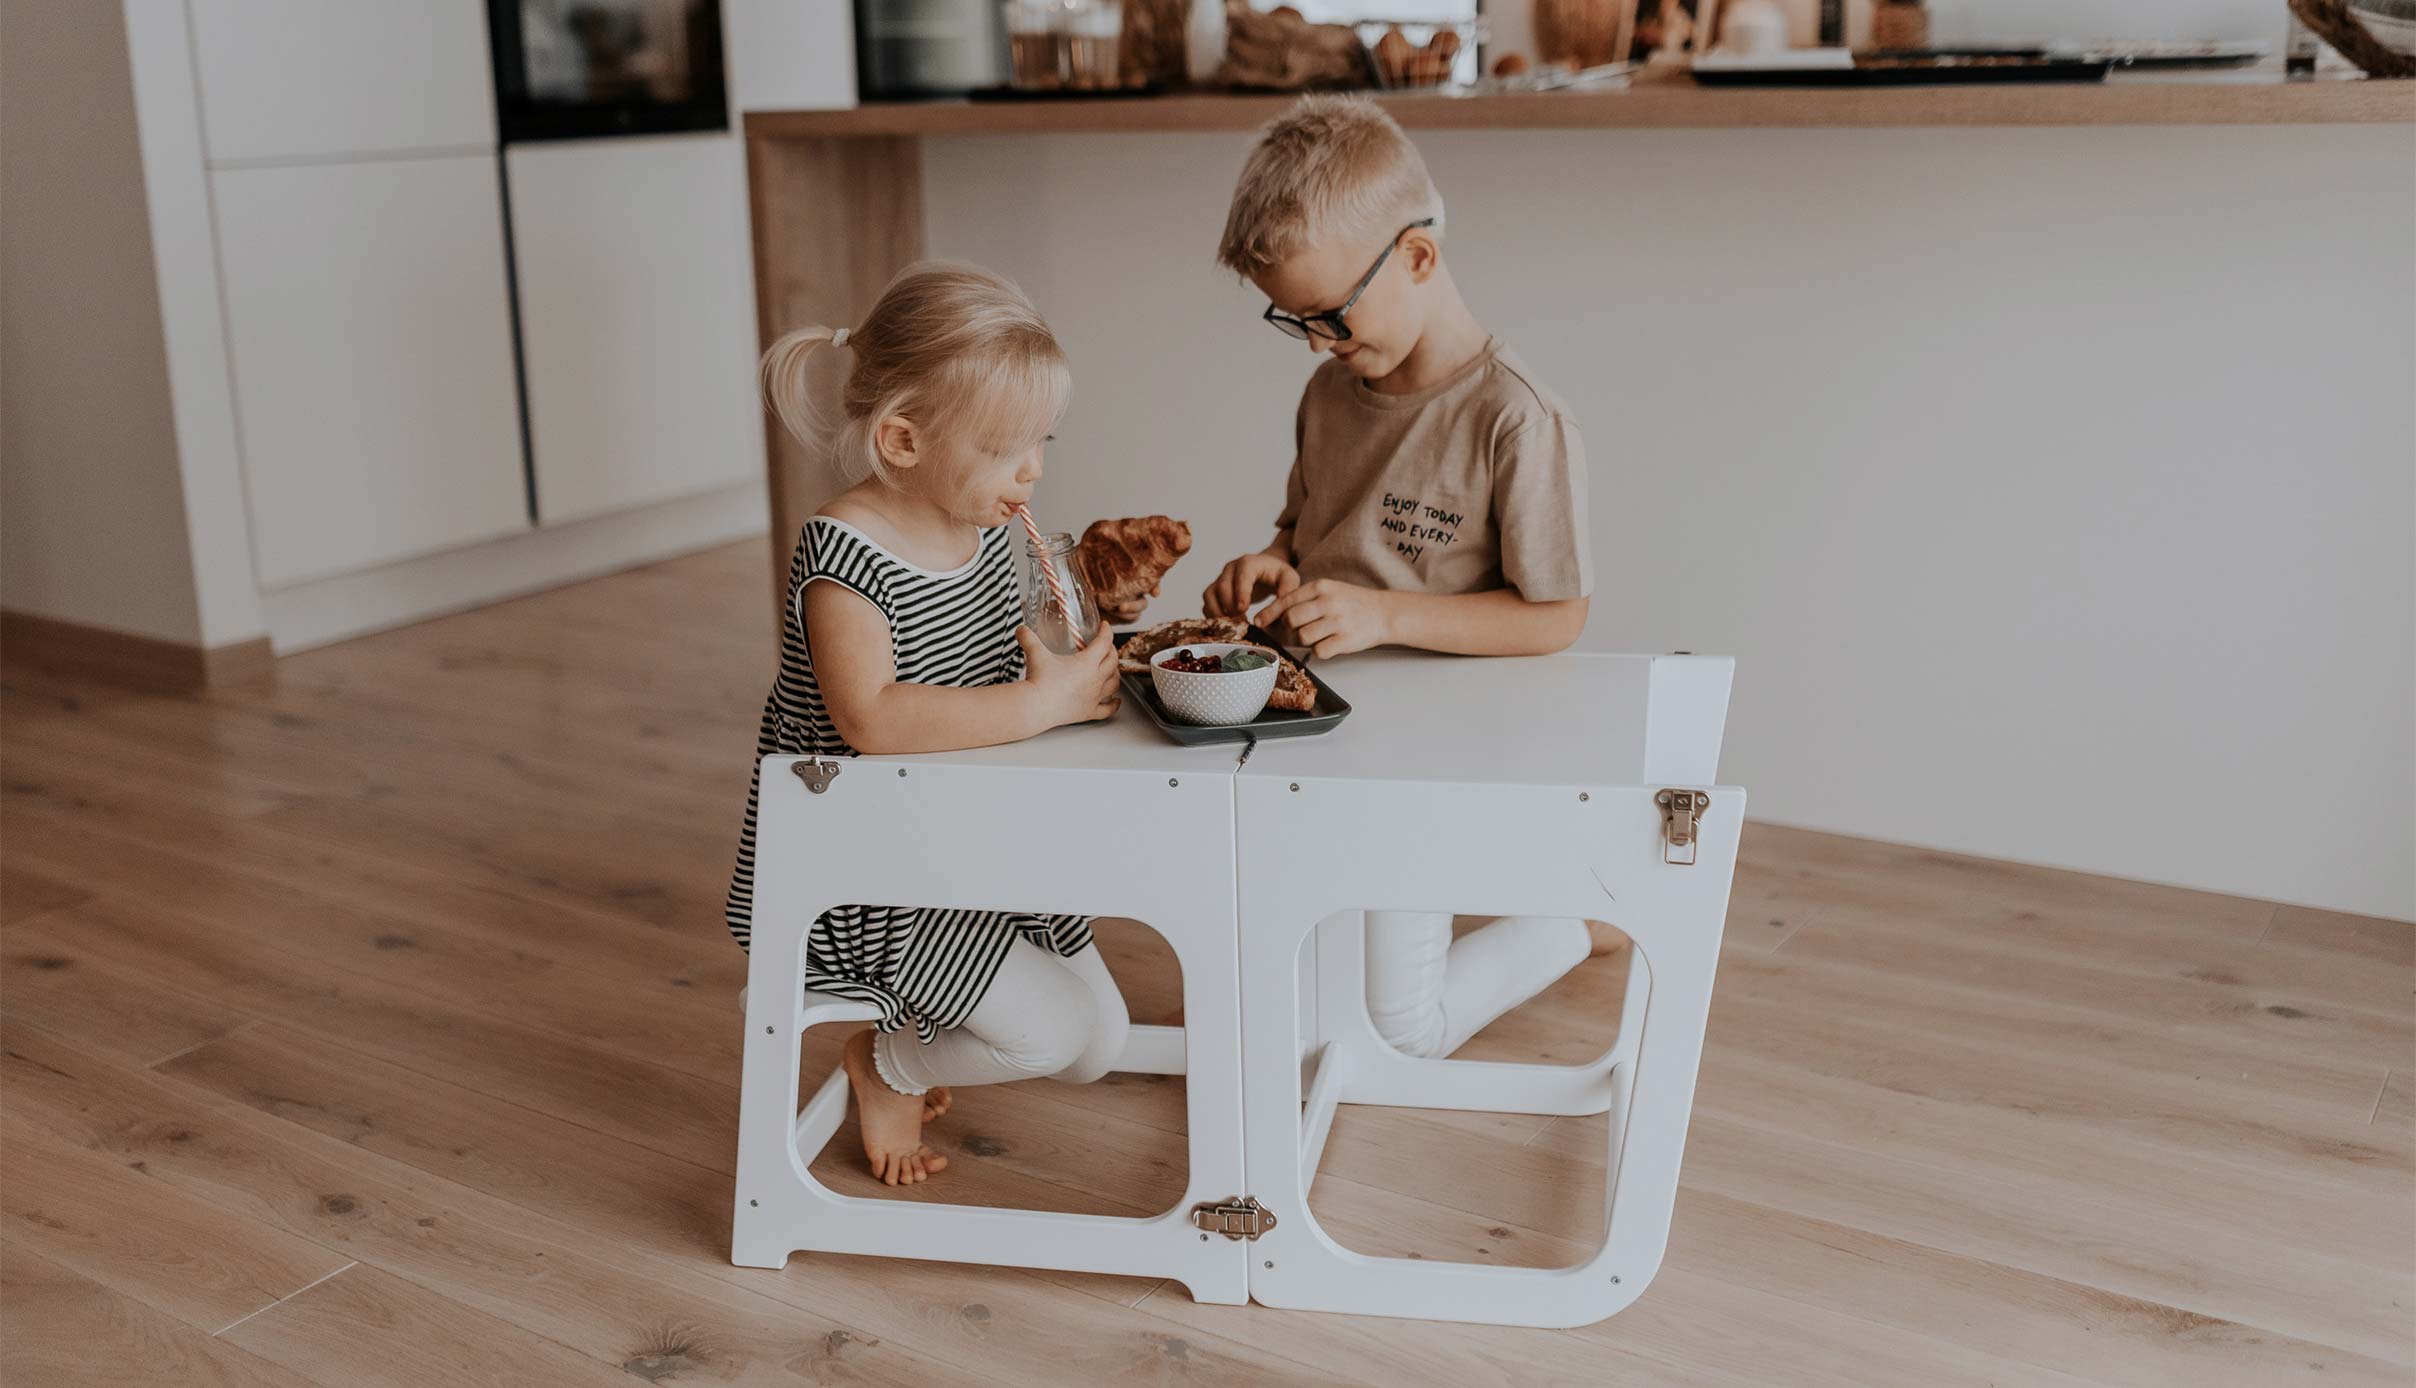 Two children sitting at a table in a kitchen.